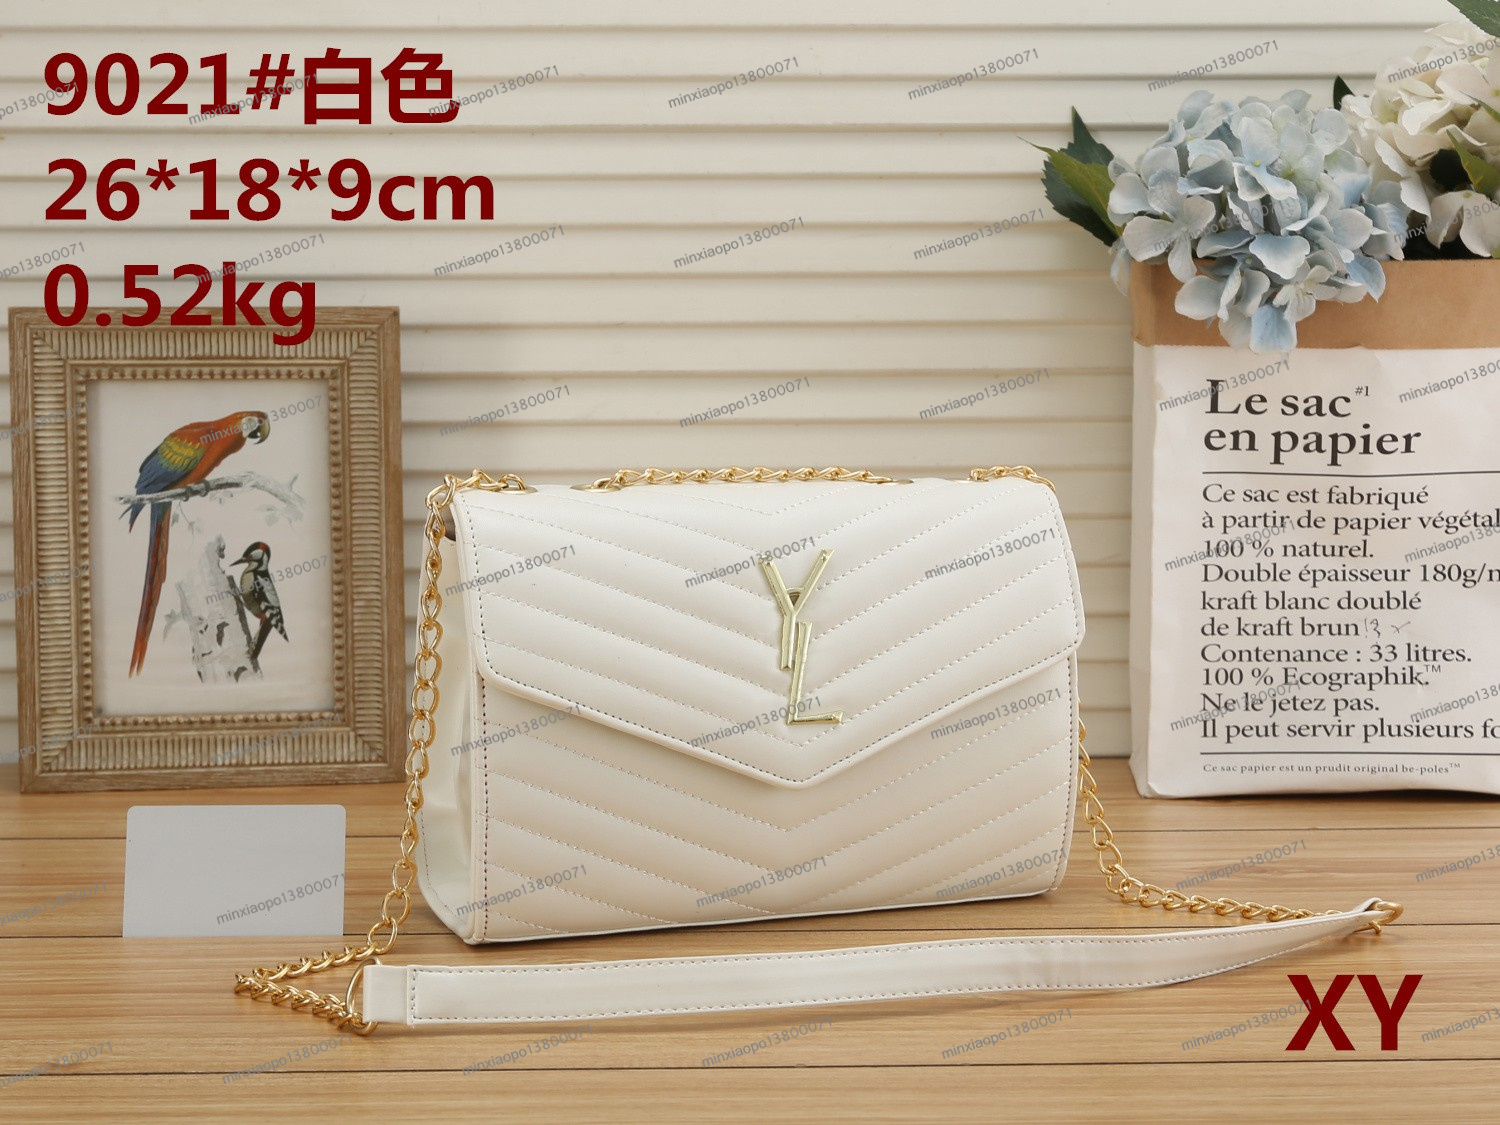 

Designer WOC yslitys Envelope Shoulder Bags With Chain For Women Fashion Luxury Leather Crossbody Handbag louise Purse vutton Crossbody viuton Bag, Extra fee (are not sold separat)